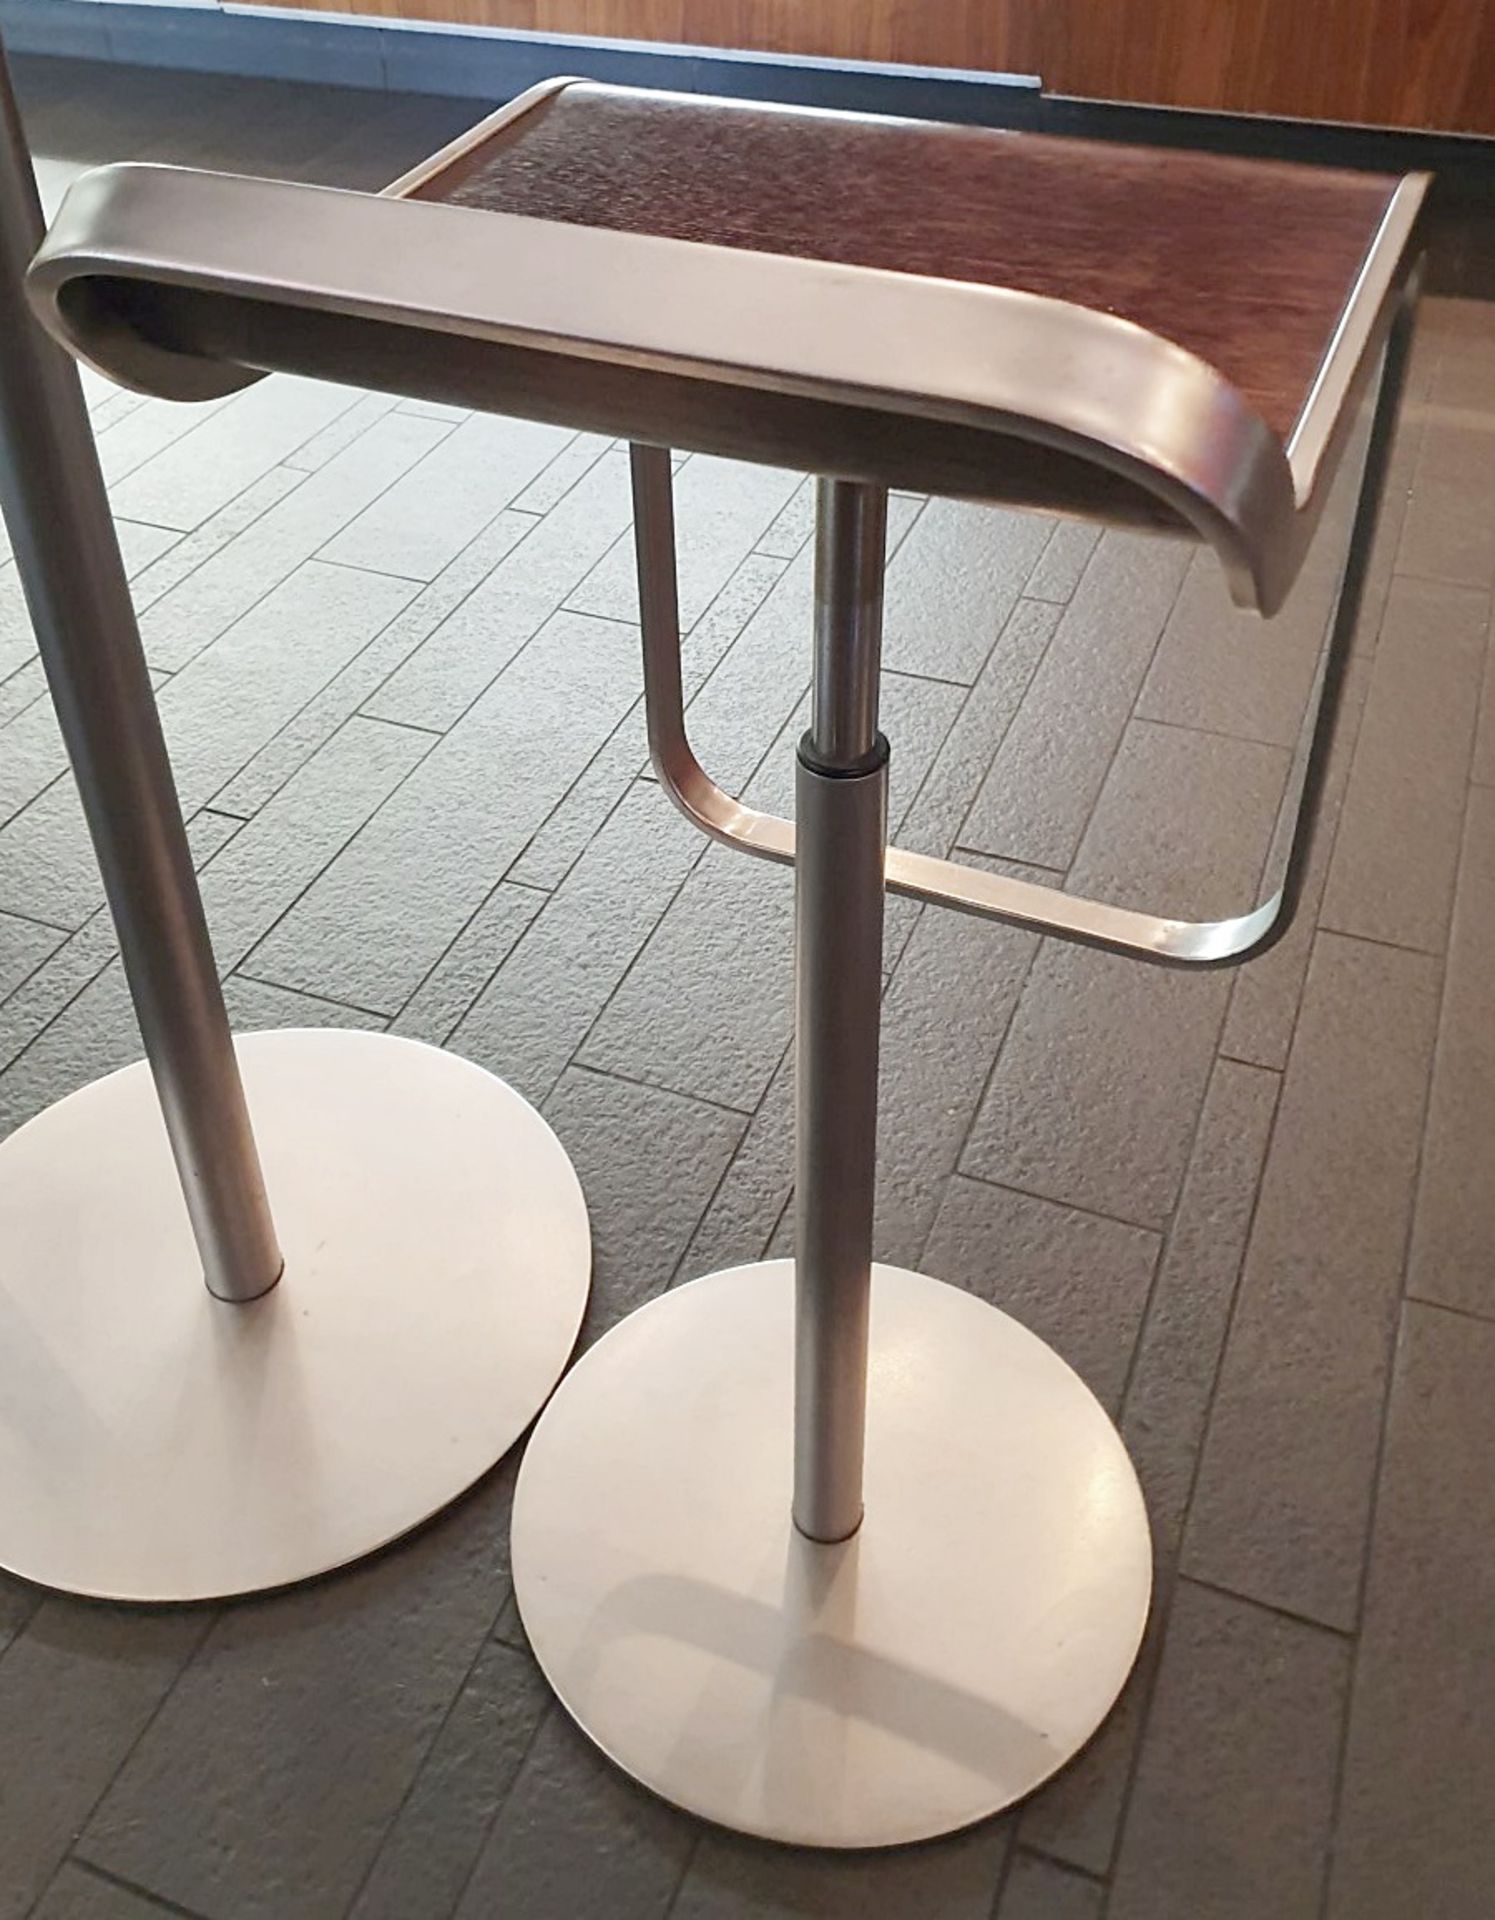 6 x Heavy Duty Commercial Bar Stools With Adjustable Hydraulic Aided Height - Dimensions: 35cm x - Image 4 of 7